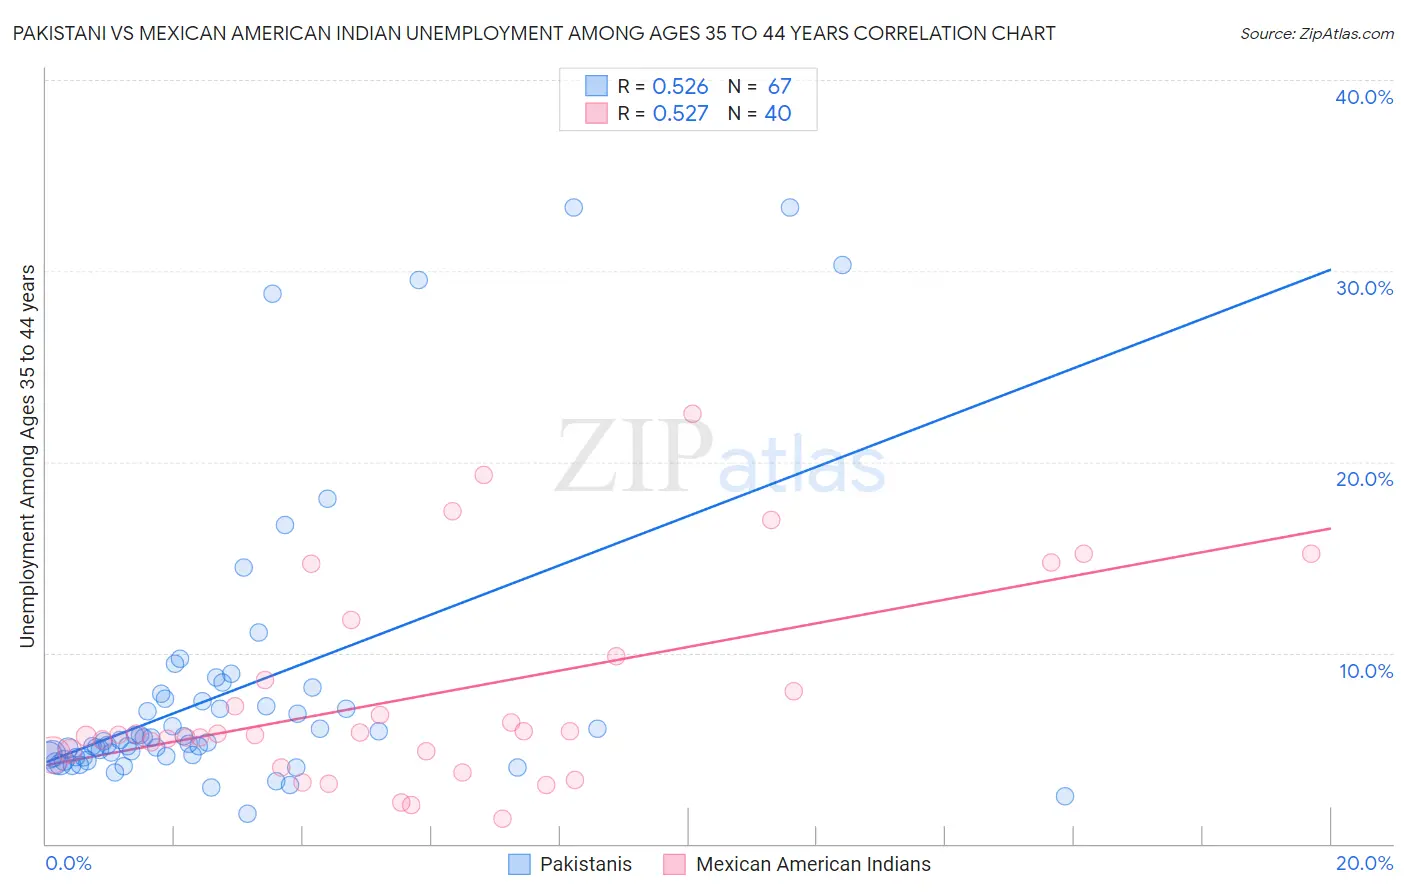 Pakistani vs Mexican American Indian Unemployment Among Ages 35 to 44 years